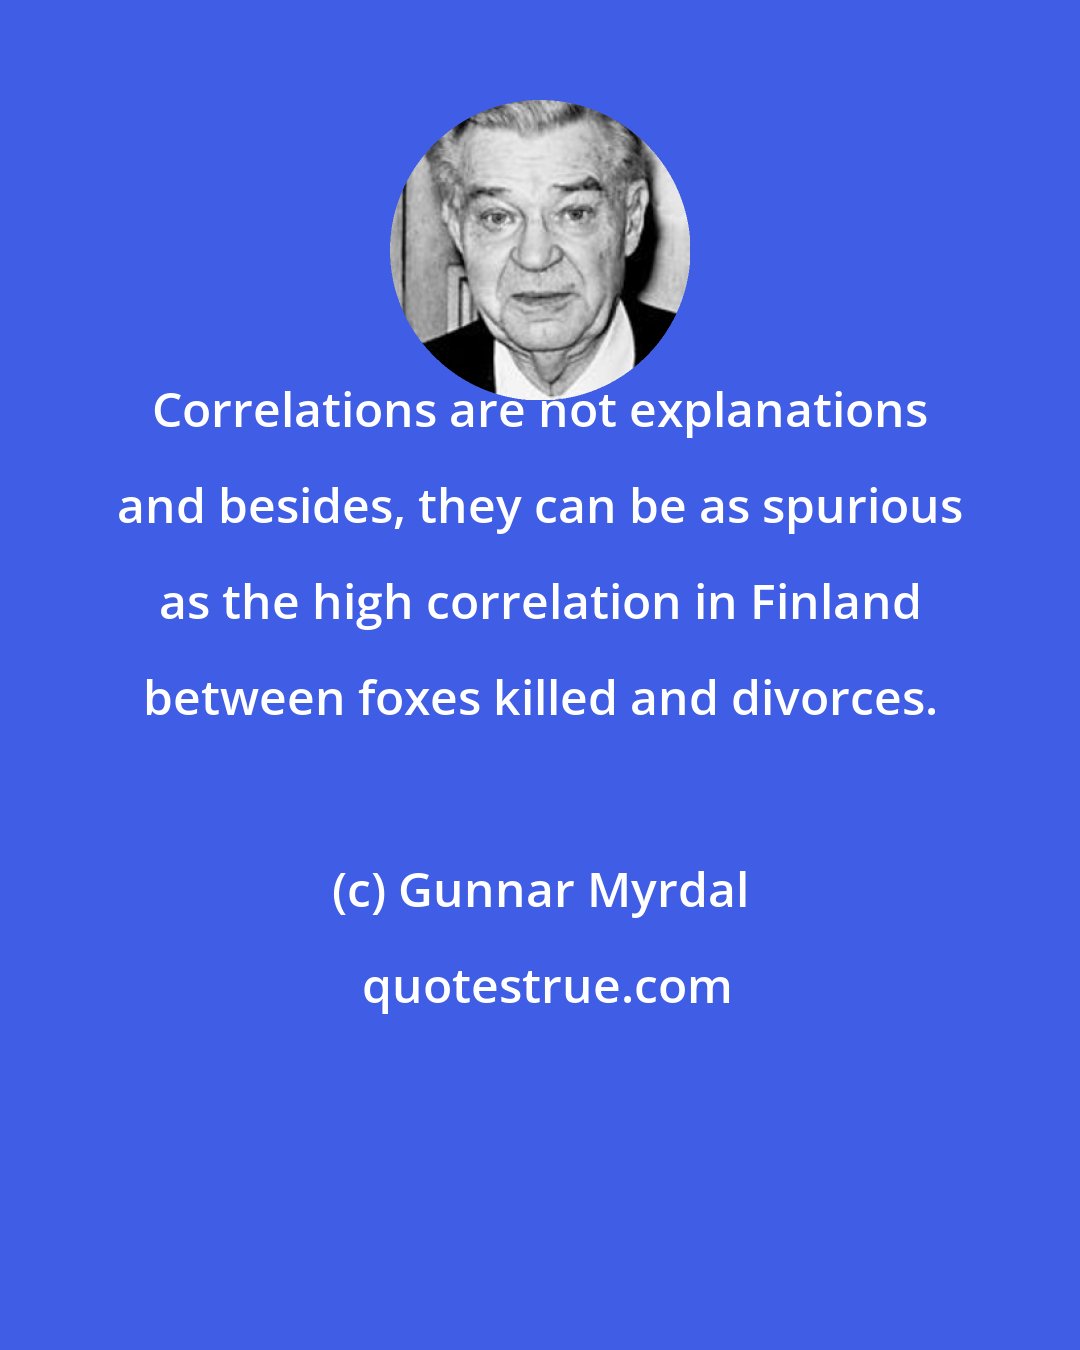 Gunnar Myrdal: Correlations are not explanations and besides, they can be as spurious as the high correlation in Finland between foxes killed and divorces.